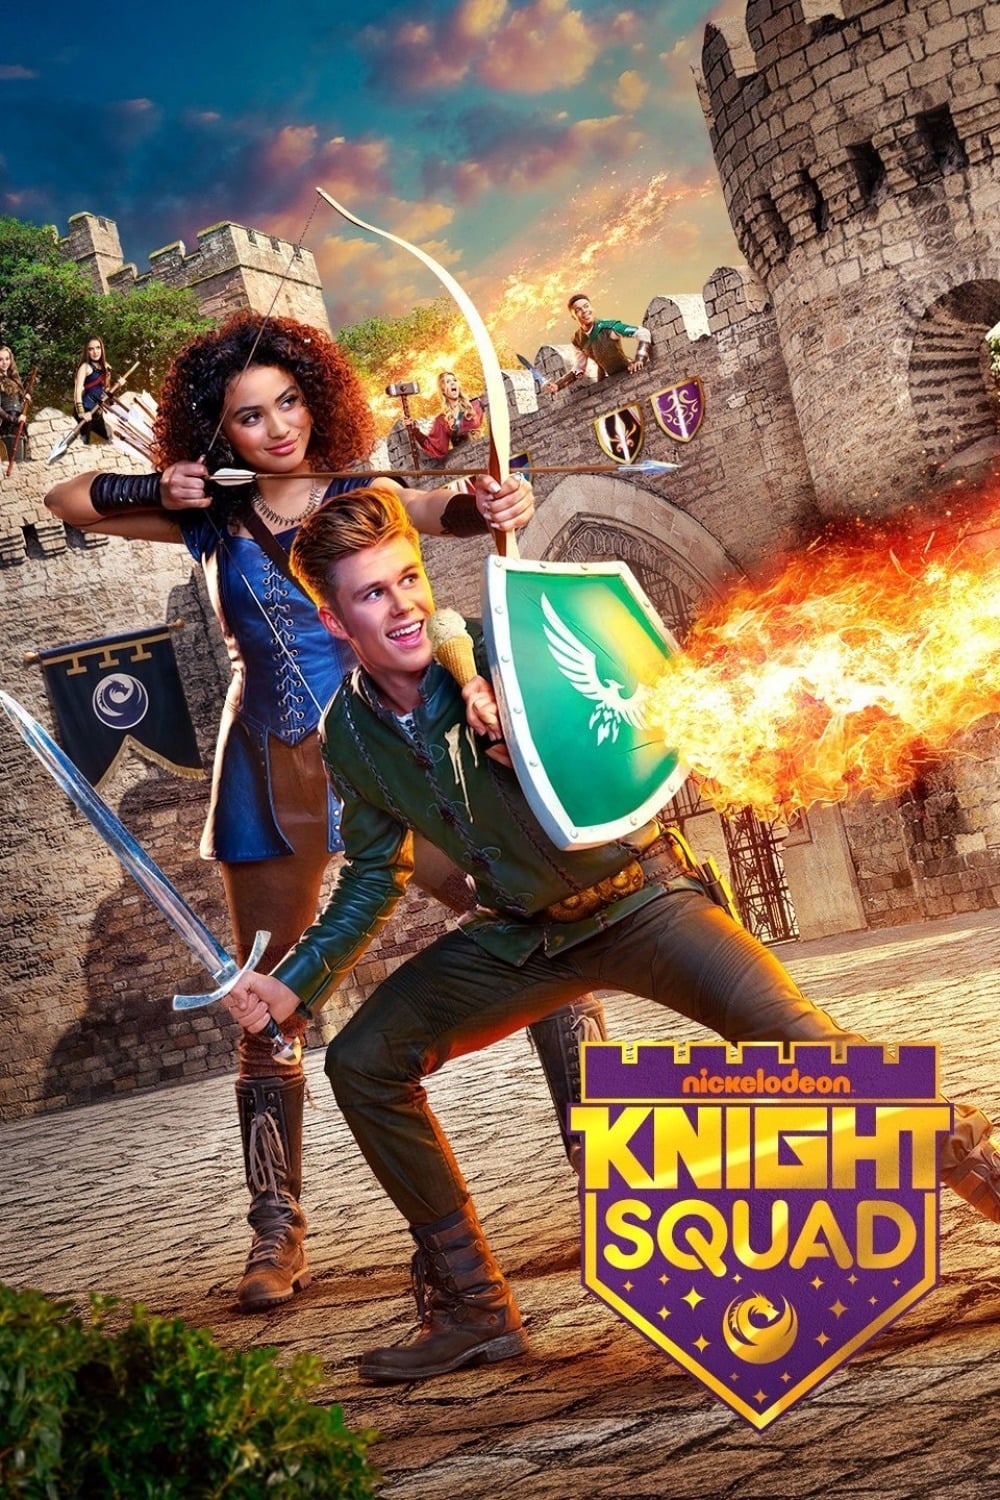 Knight Squad TV Shows About Teen Comedy